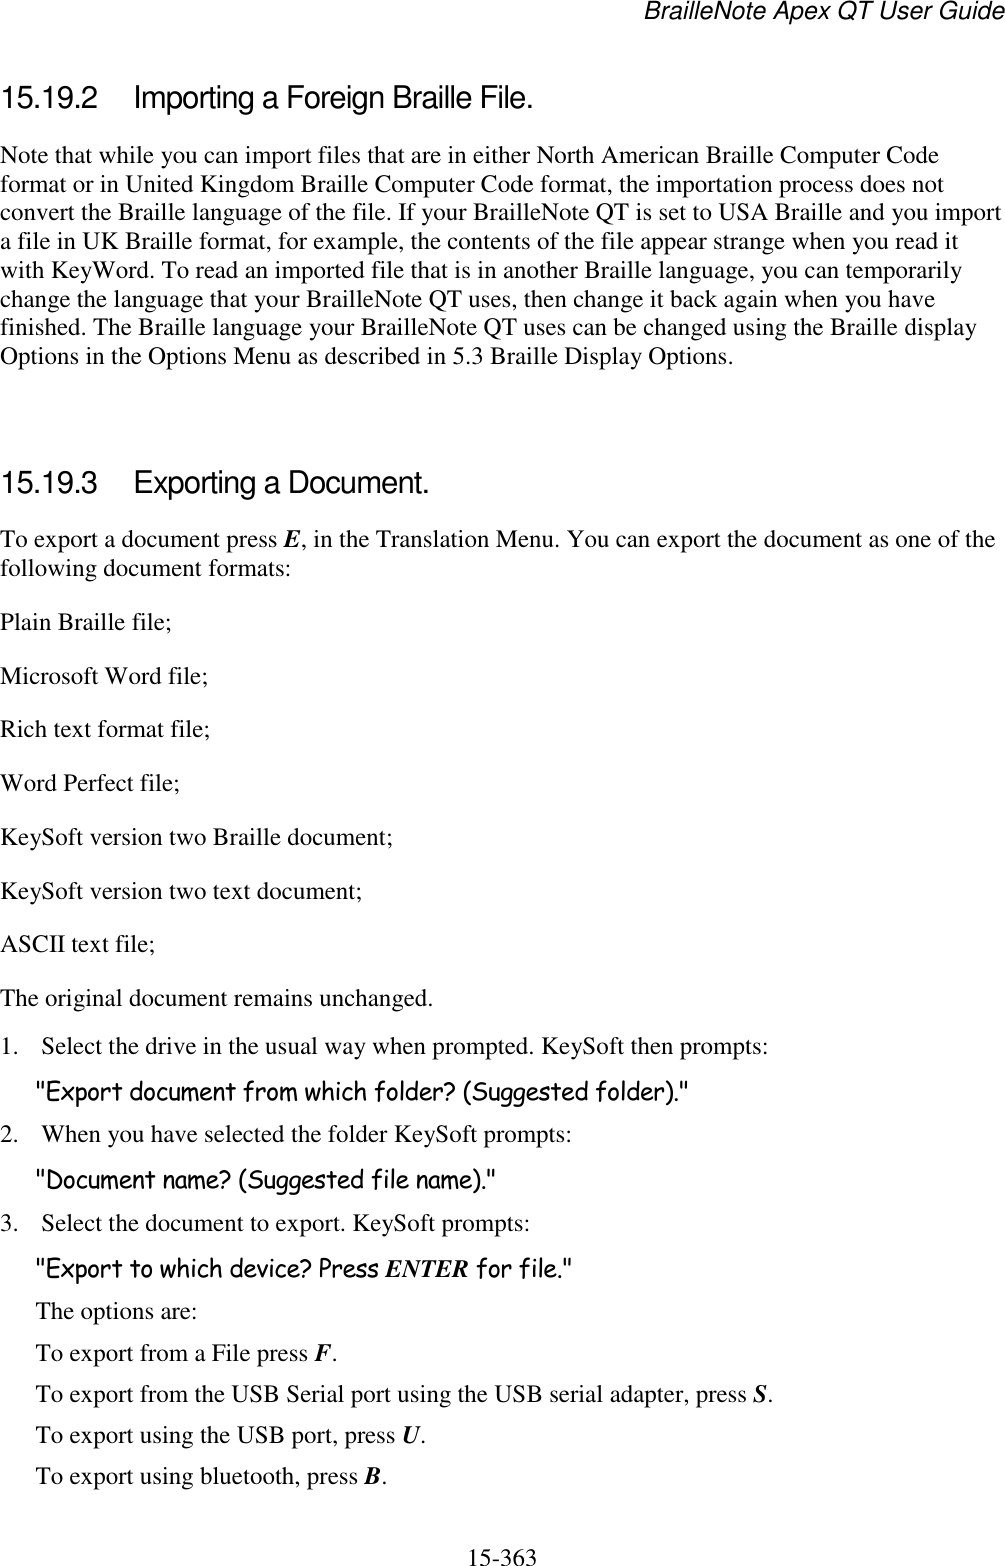 BrailleNote Apex QT User Guide  15-363   15.19.2  Importing a Foreign Braille File. Note that while you can import files that are in either North American Braille Computer Code format or in United Kingdom Braille Computer Code format, the importation process does not convert the Braille language of the file. If your BrailleNote QT is set to USA Braille and you import a file in UK Braille format, for example, the contents of the file appear strange when you read it with KeyWord. To read an imported file that is in another Braille language, you can temporarily change the language that your BrailleNote QT uses, then change it back again when you have finished. The Braille language your BrailleNote QT uses can be changed using the Braille display Options in the Options Menu as described in 5.3 Braille Display Options.   15.19.3  Exporting a Document. To export a document press E, in the Translation Menu. You can export the document as one of the following document formats: Plain Braille file; Microsoft Word file; Rich text format file; Word Perfect file; KeySoft version two Braille document; KeySoft version two text document; ASCII text file; The original document remains unchanged. 1. Select the drive in the usual way when prompted. KeySoft then prompts: &quot;Export document from which folder? (Suggested folder).&quot; 2. When you have selected the folder KeySoft prompts: &quot;Document name? (Suggested file name).&quot; 3. Select the document to export. KeySoft prompts: &quot;Export to which device? Press ENTER for file.&quot; The options are: To export from a File press F. To export from the USB Serial port using the USB serial adapter, press S. To export using the USB port, press U. To export using bluetooth, press B.  